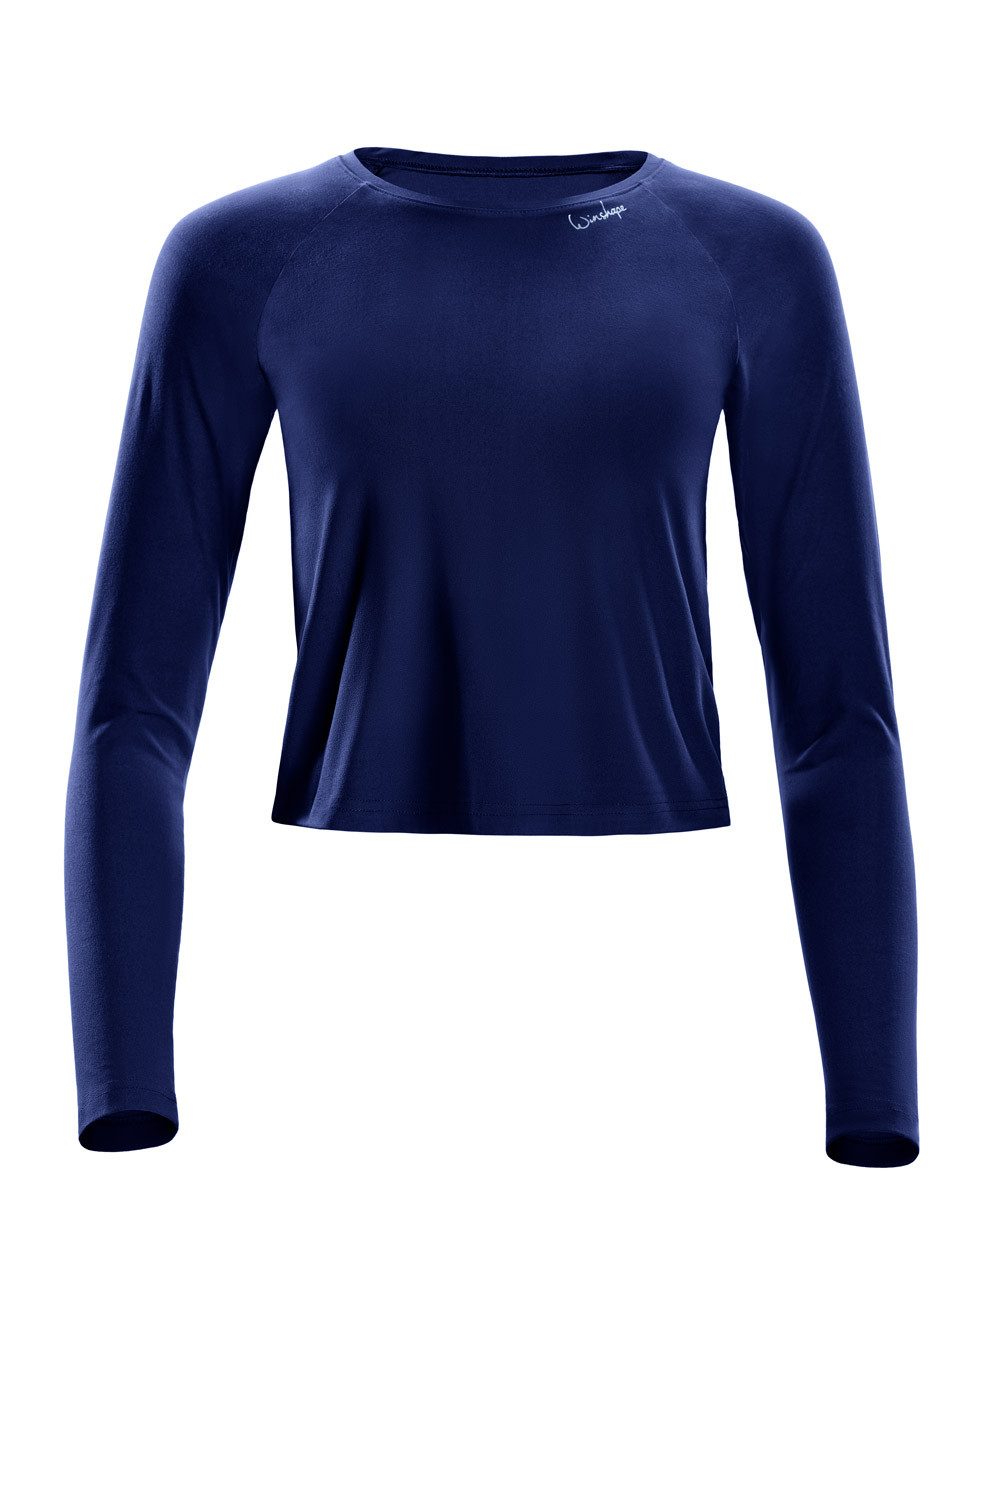 Winshape Sleeve Long Functional Style AET119LS, blue, Top Soft Soft Cropped and dark Light Ultra